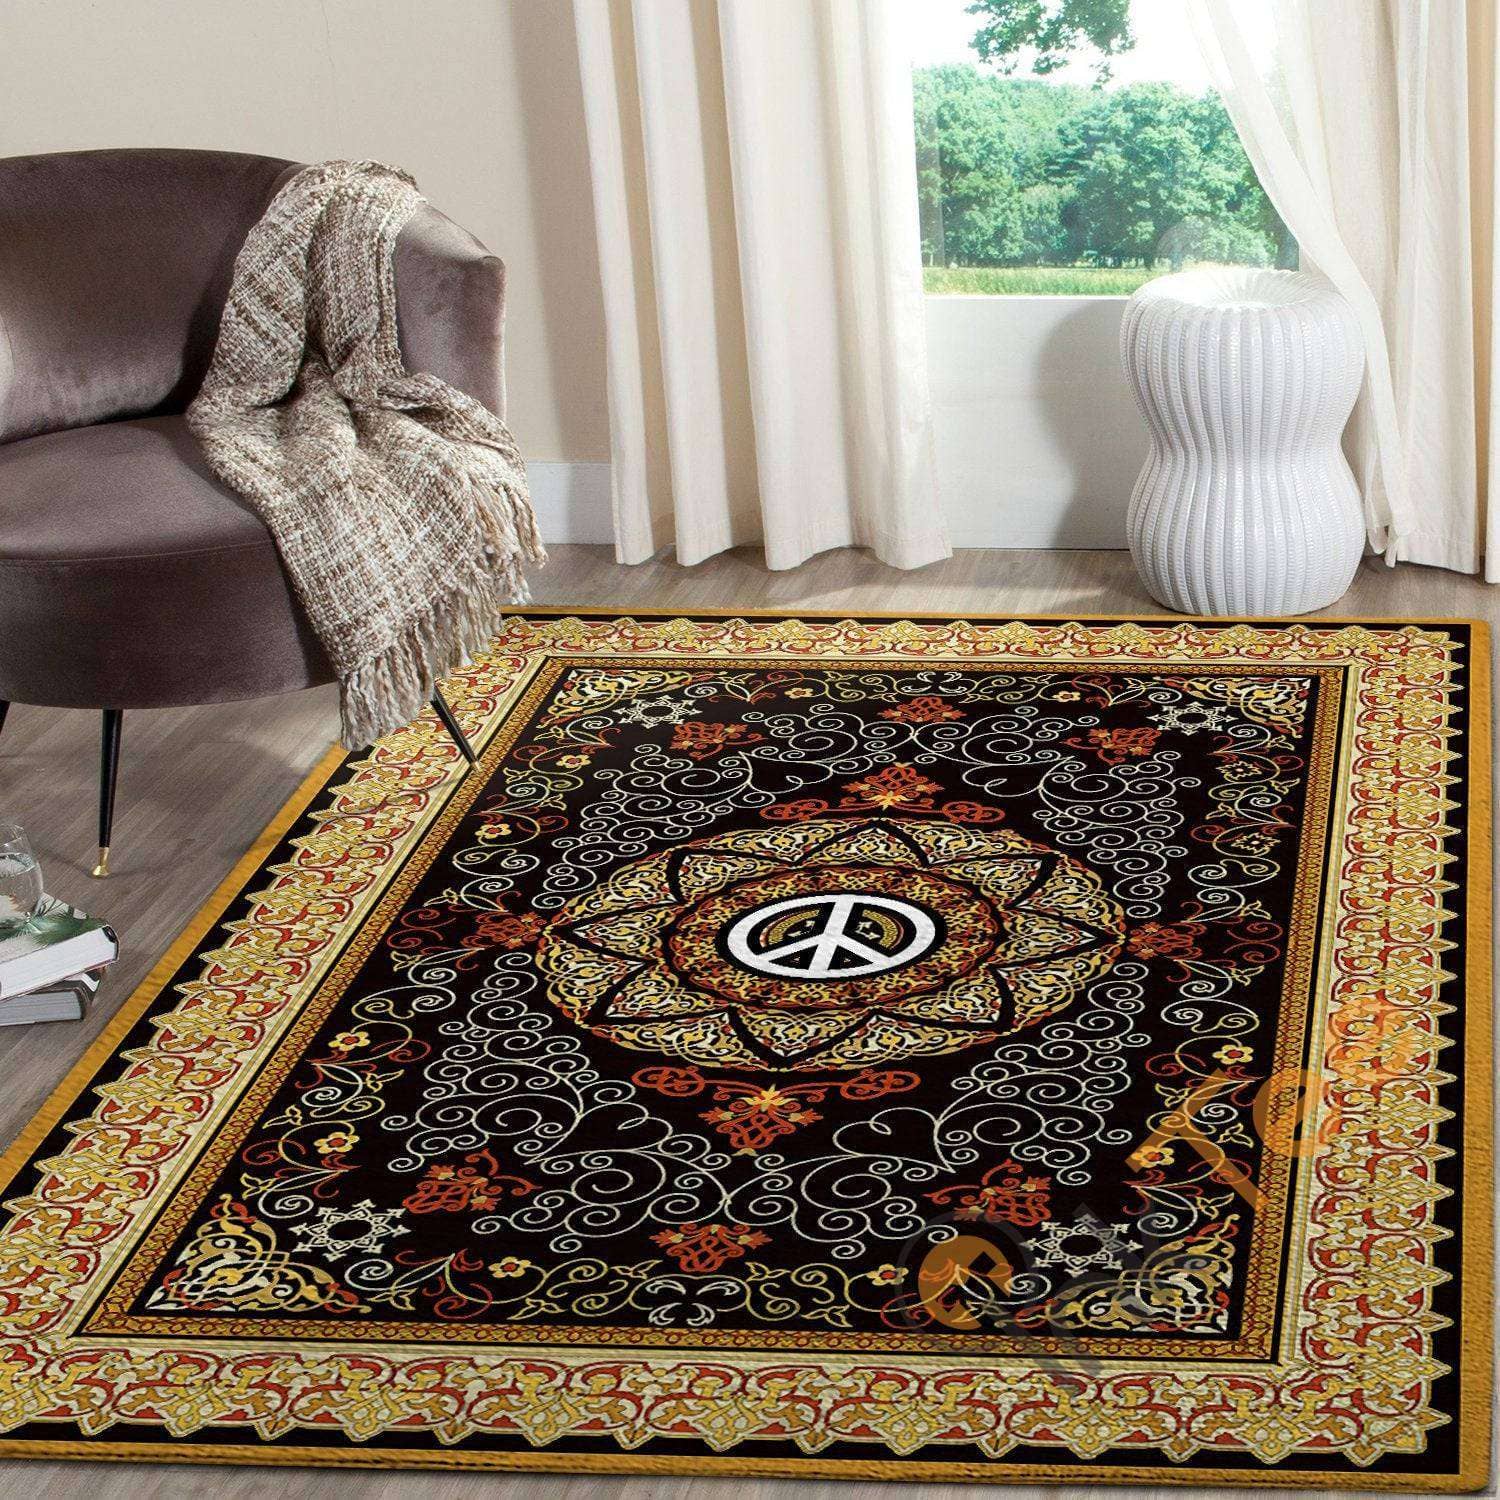 Hippie Peace Sign With Gorgeous Patterns Floor Decor Soft Livingroom Bedroom Carpet Highlight For Home Gift Her Rug